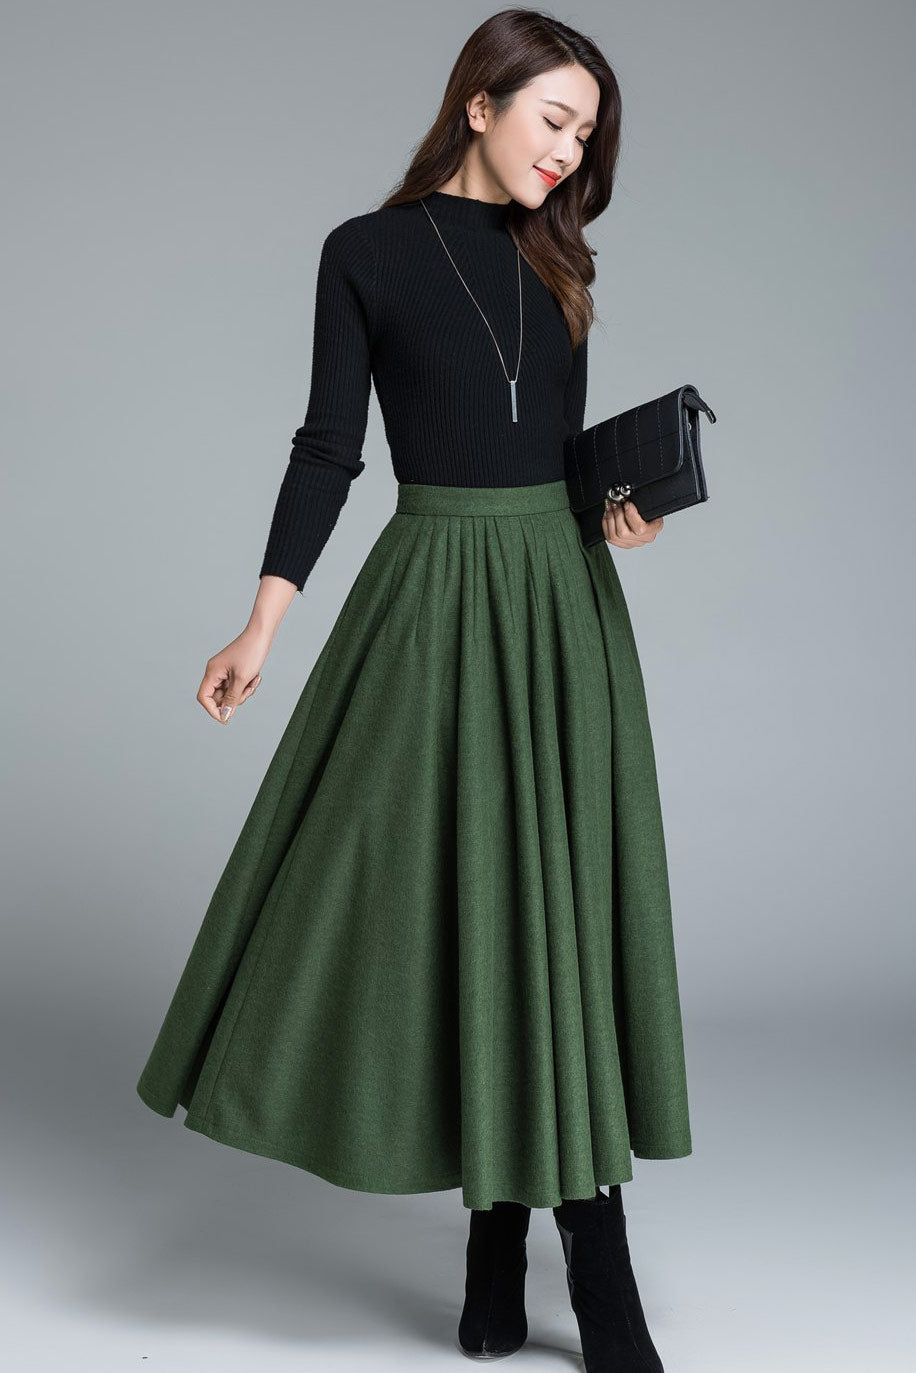 8 Chic Ways To Style A Maxi Skirt | Preview.ph